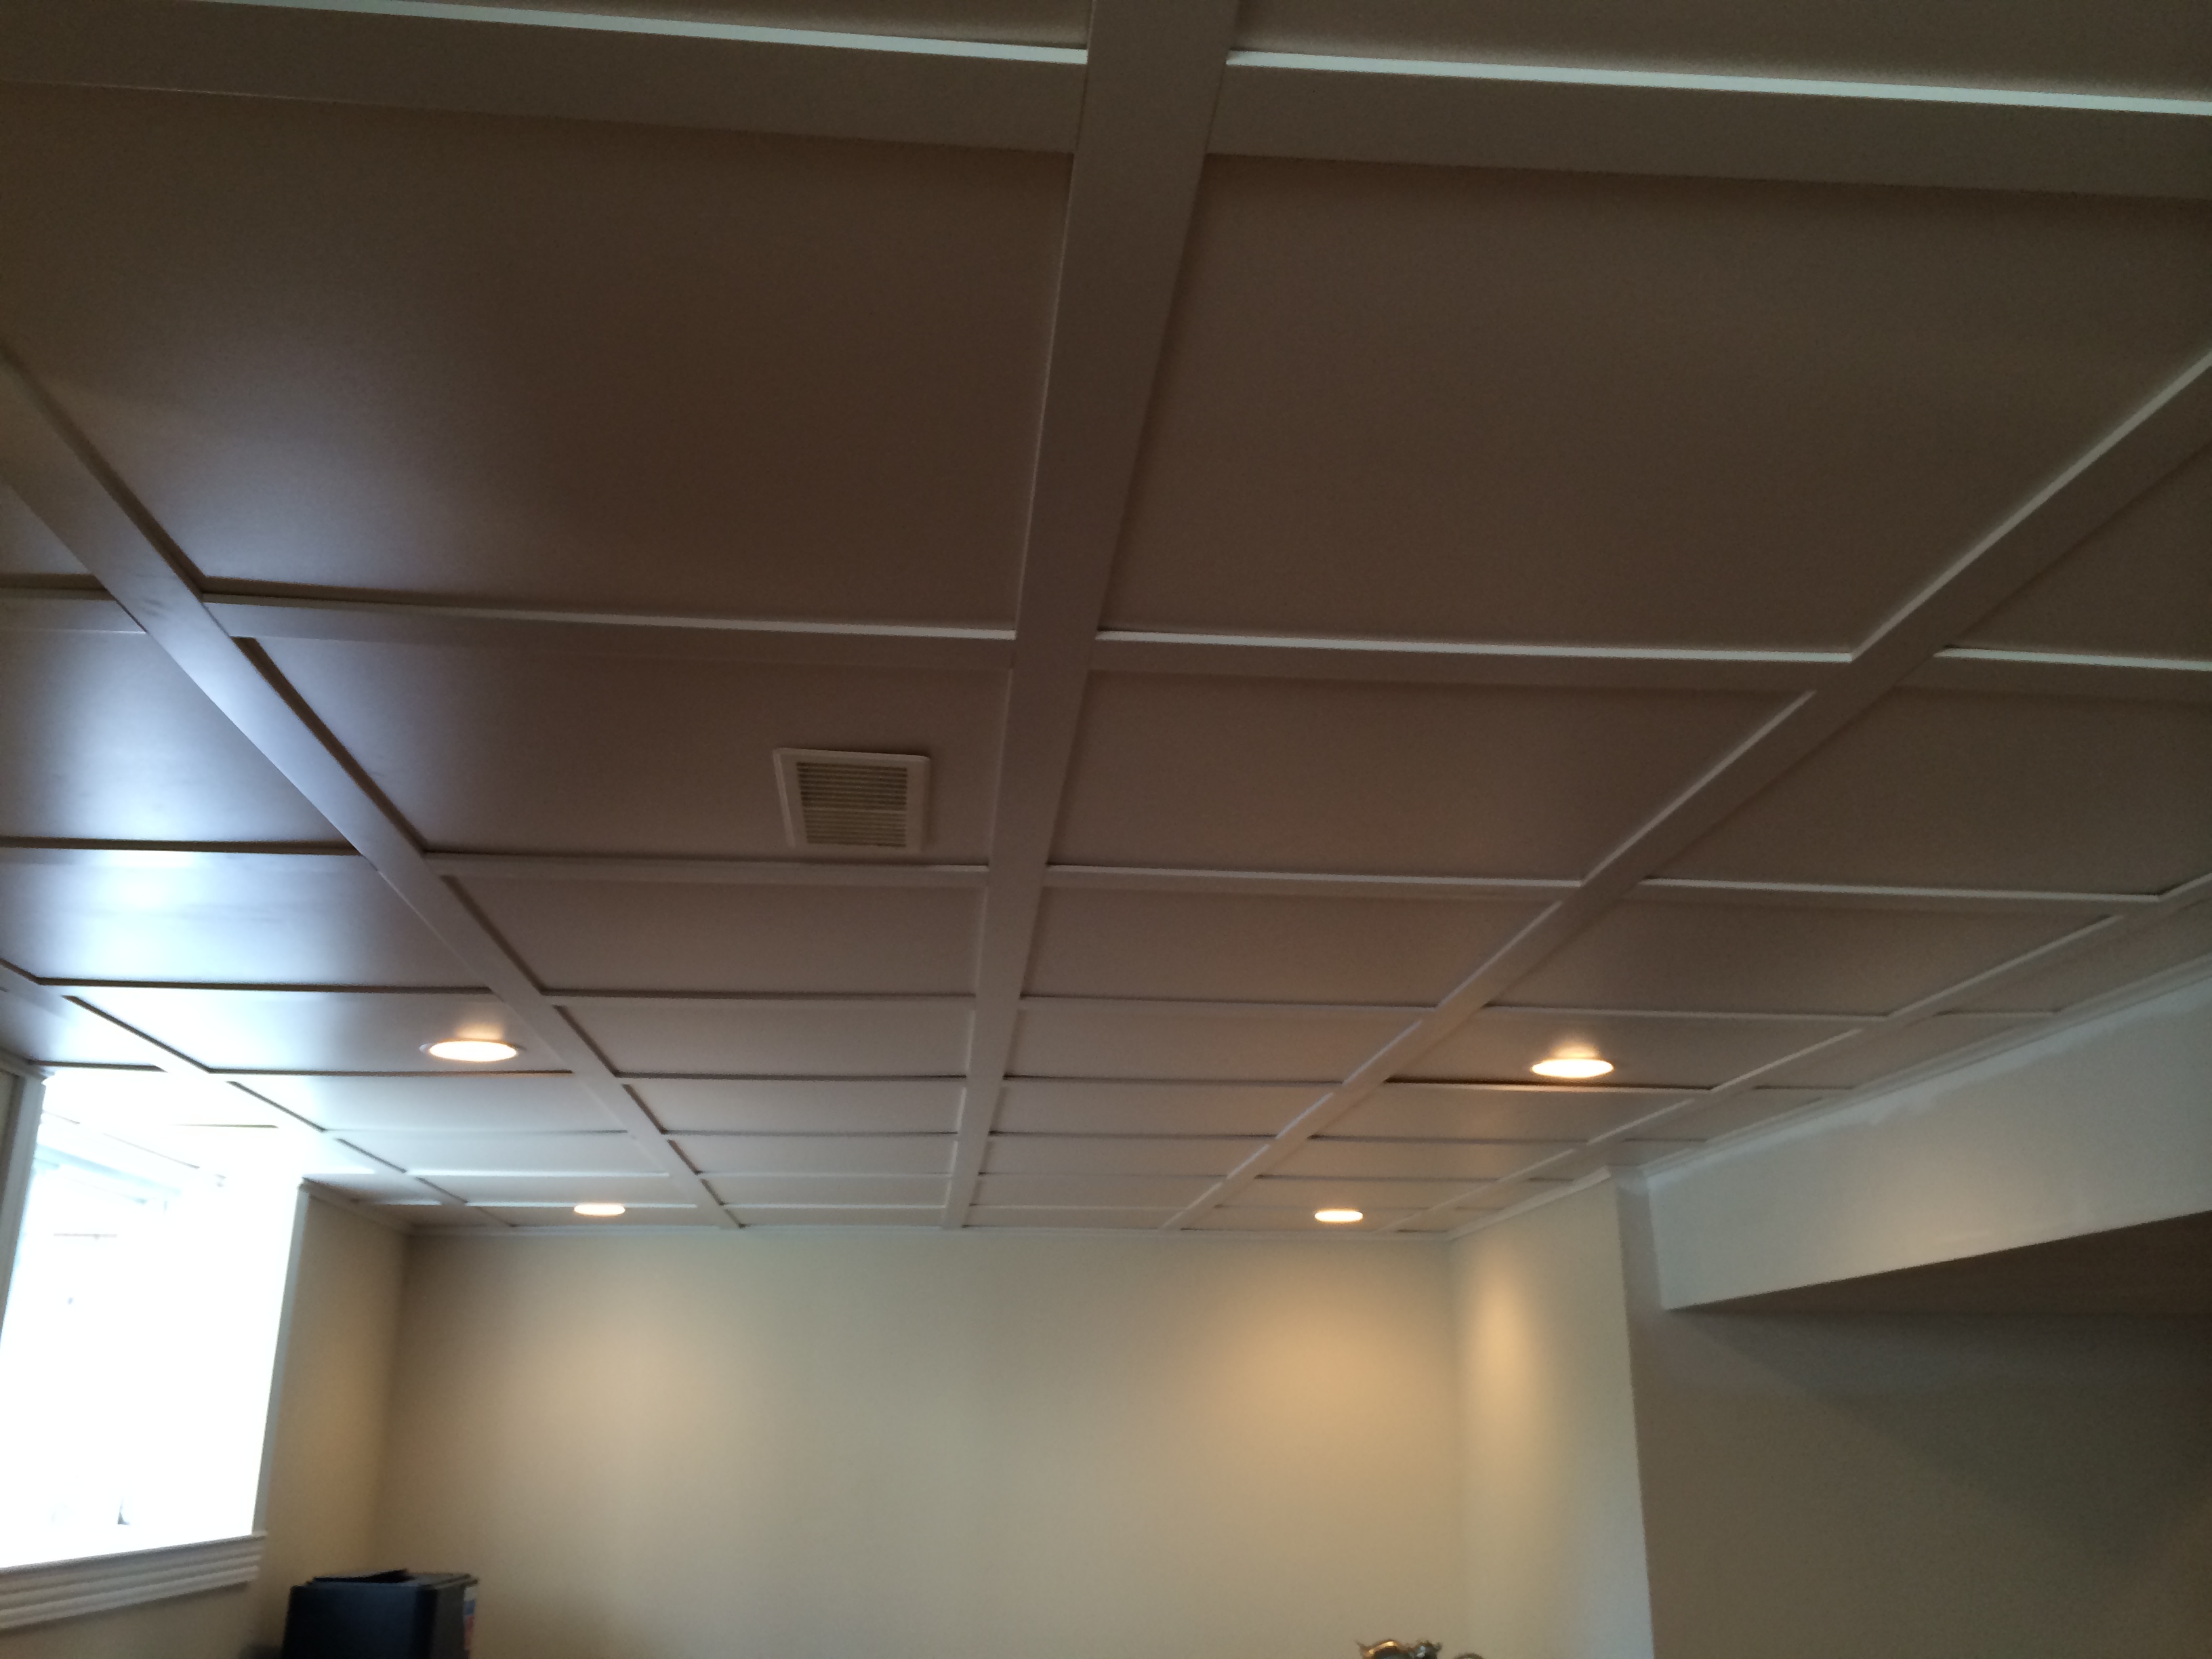 install support beam in ceiling